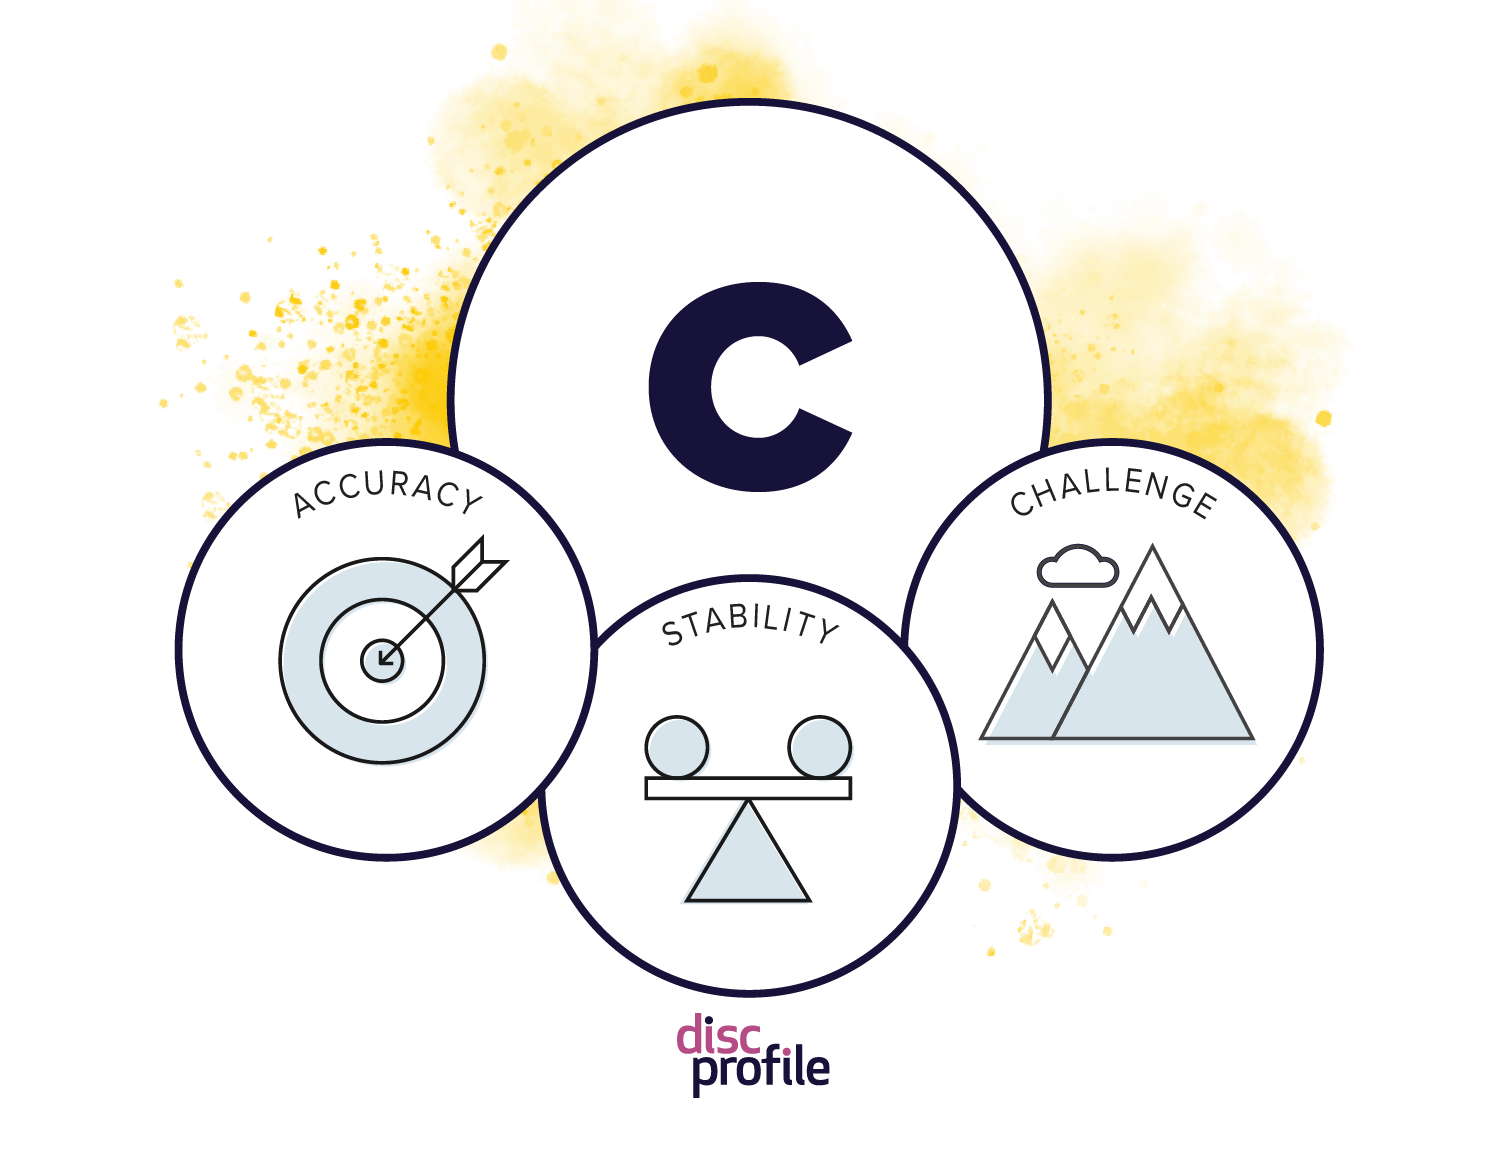 C style graphic showing priorities of accuracy, stability, and challenge